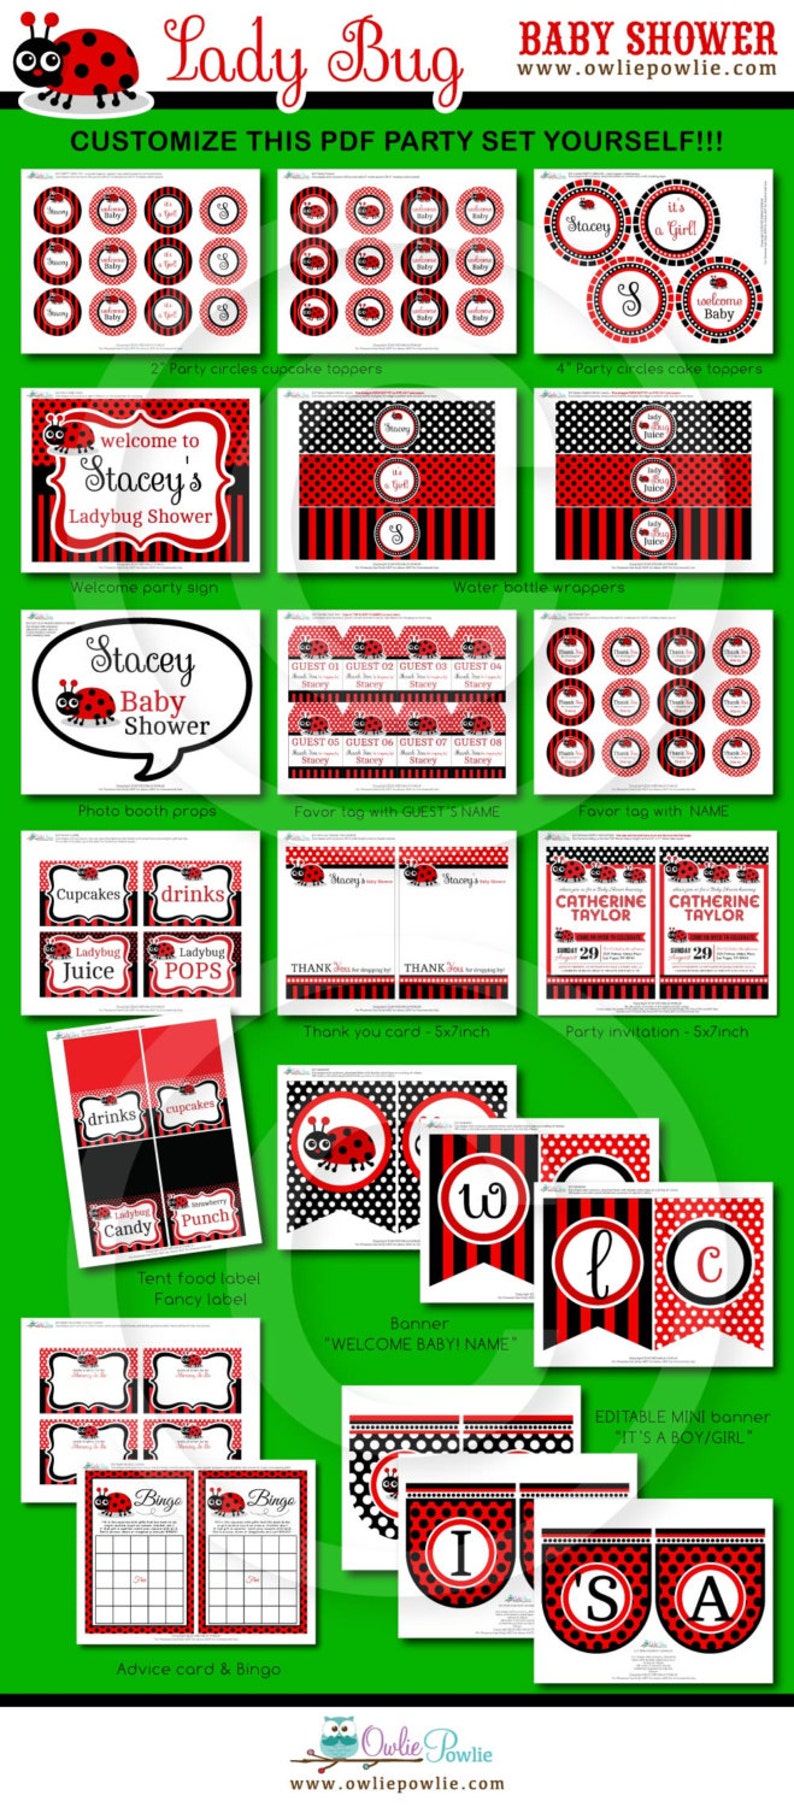 Lady Bug BABY Shower Party Printable Package & Invitation image 9